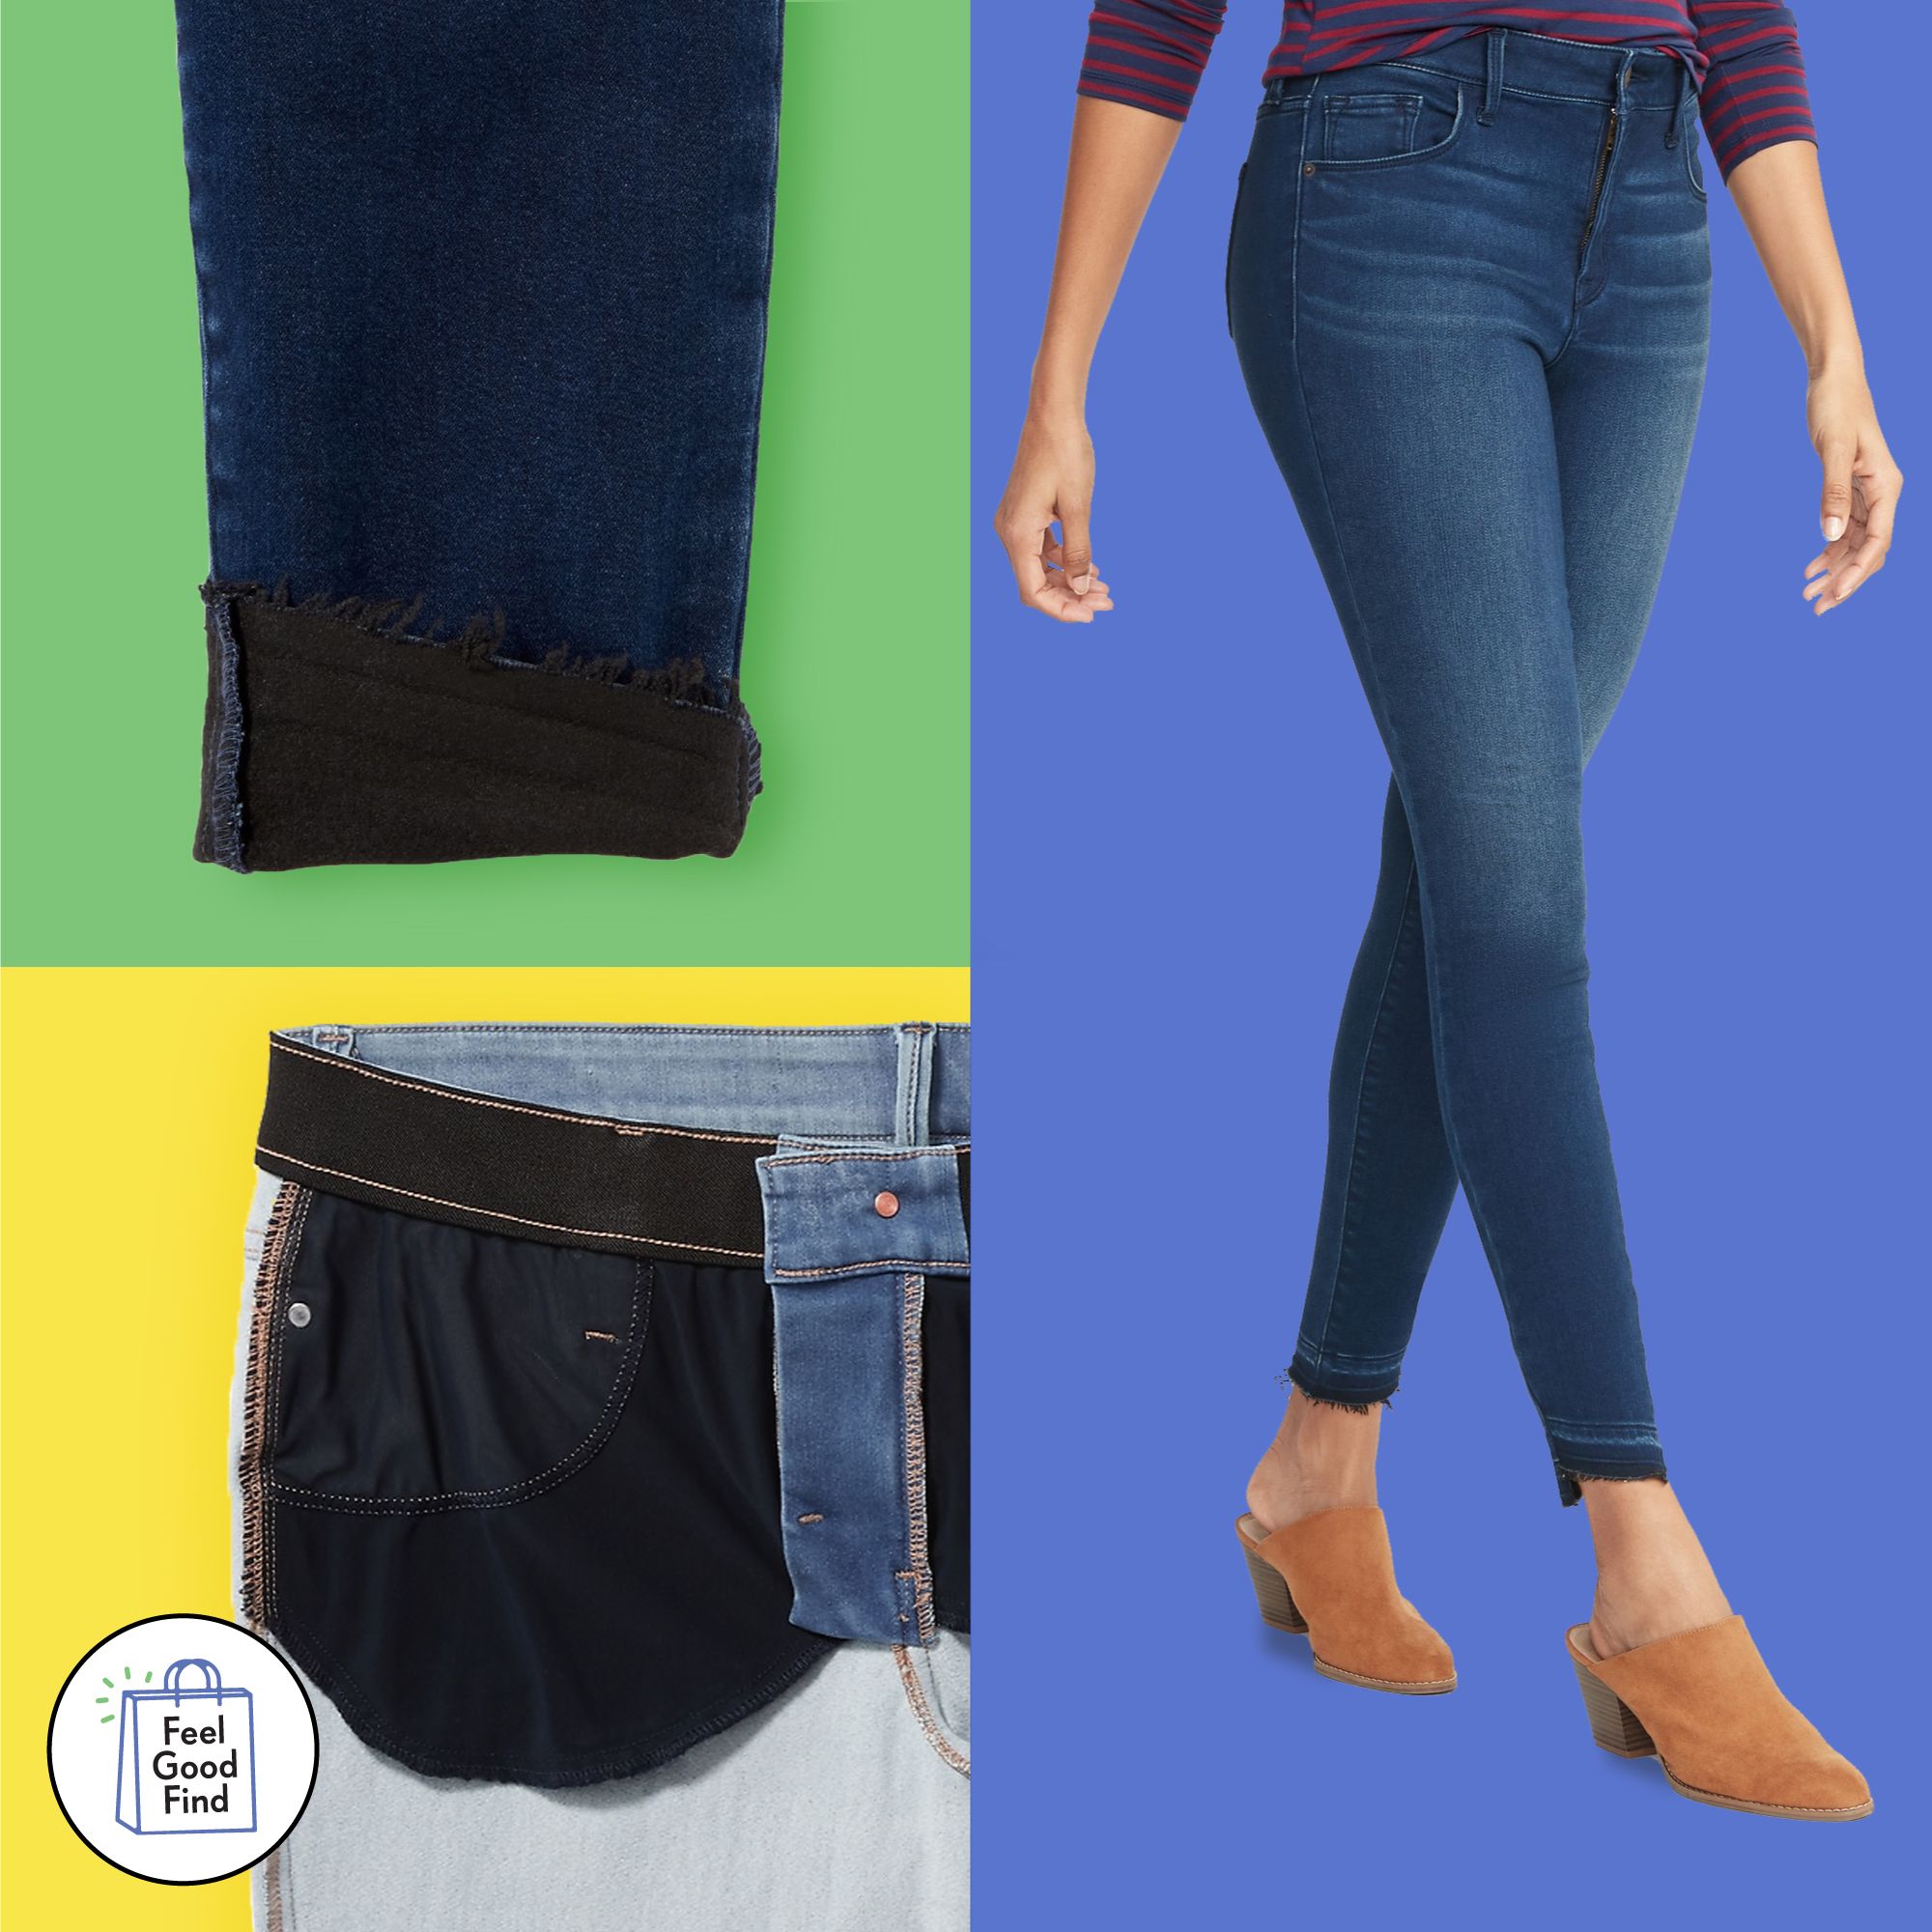 types of old navy jeans